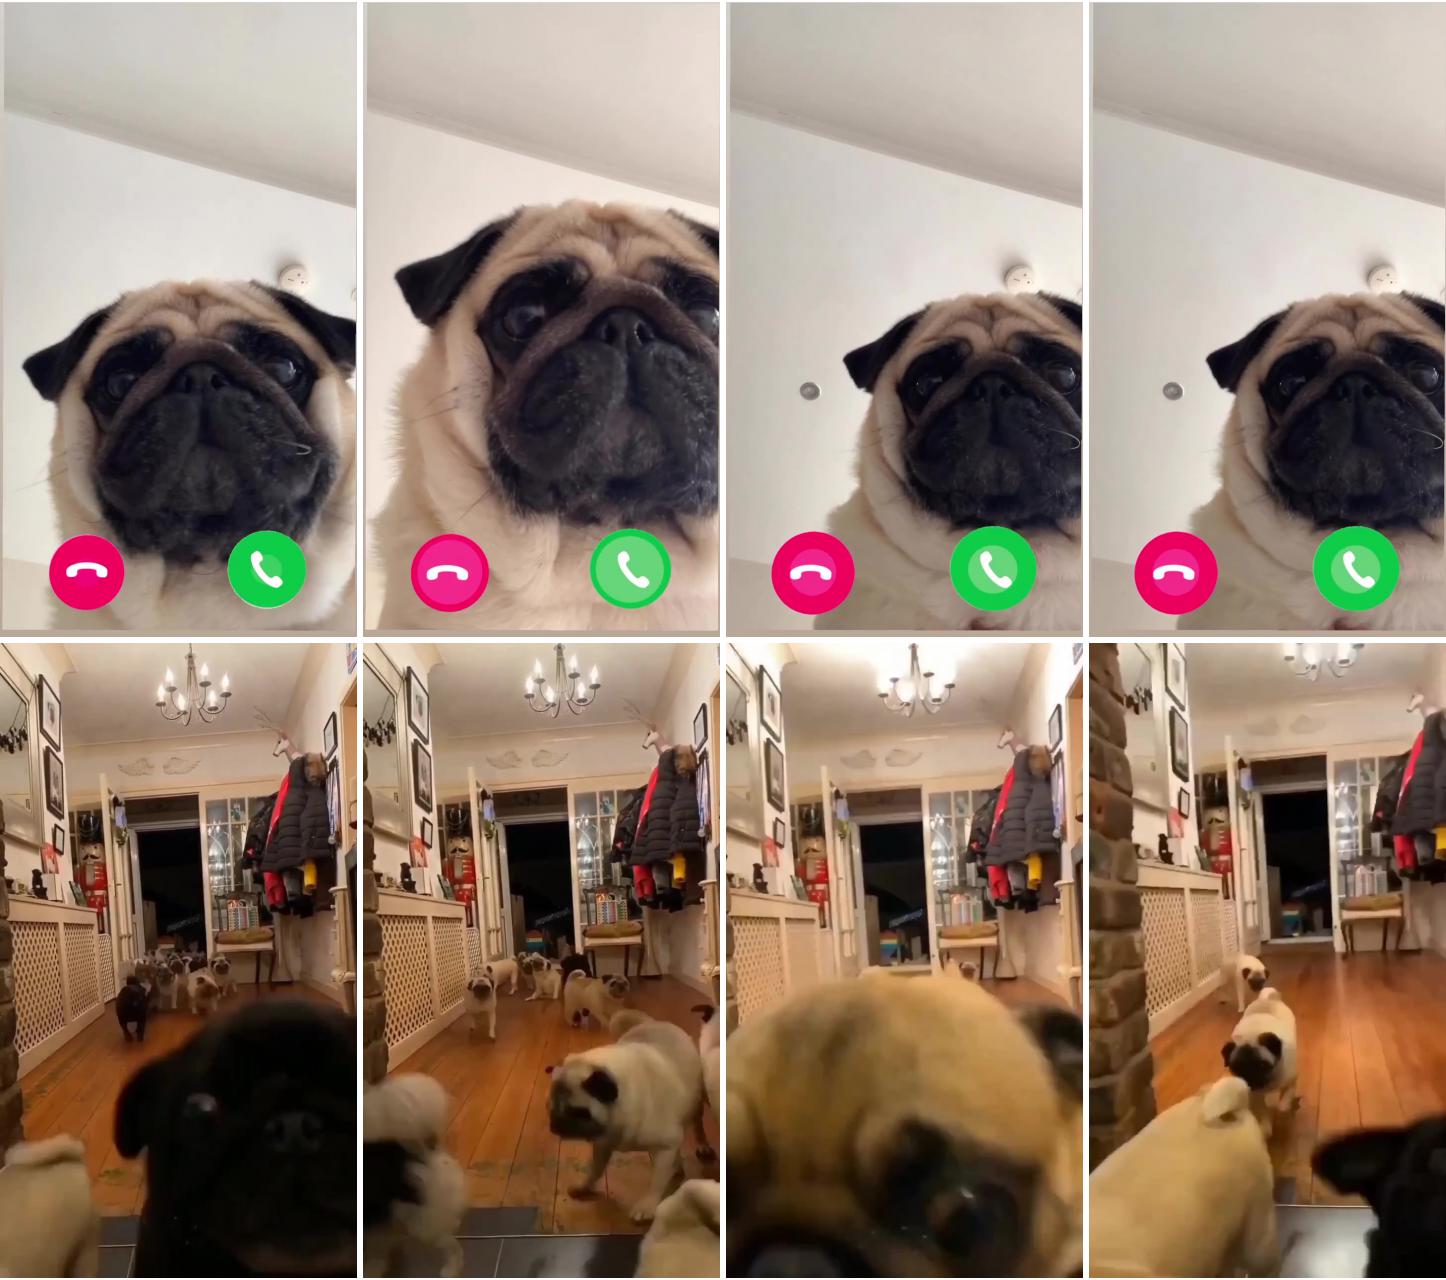 Am i the only one hate phone calls
if you love pug follow us;  adorable pug puppy invasion: house flooded with cuteness  funny and heartwarming moments 